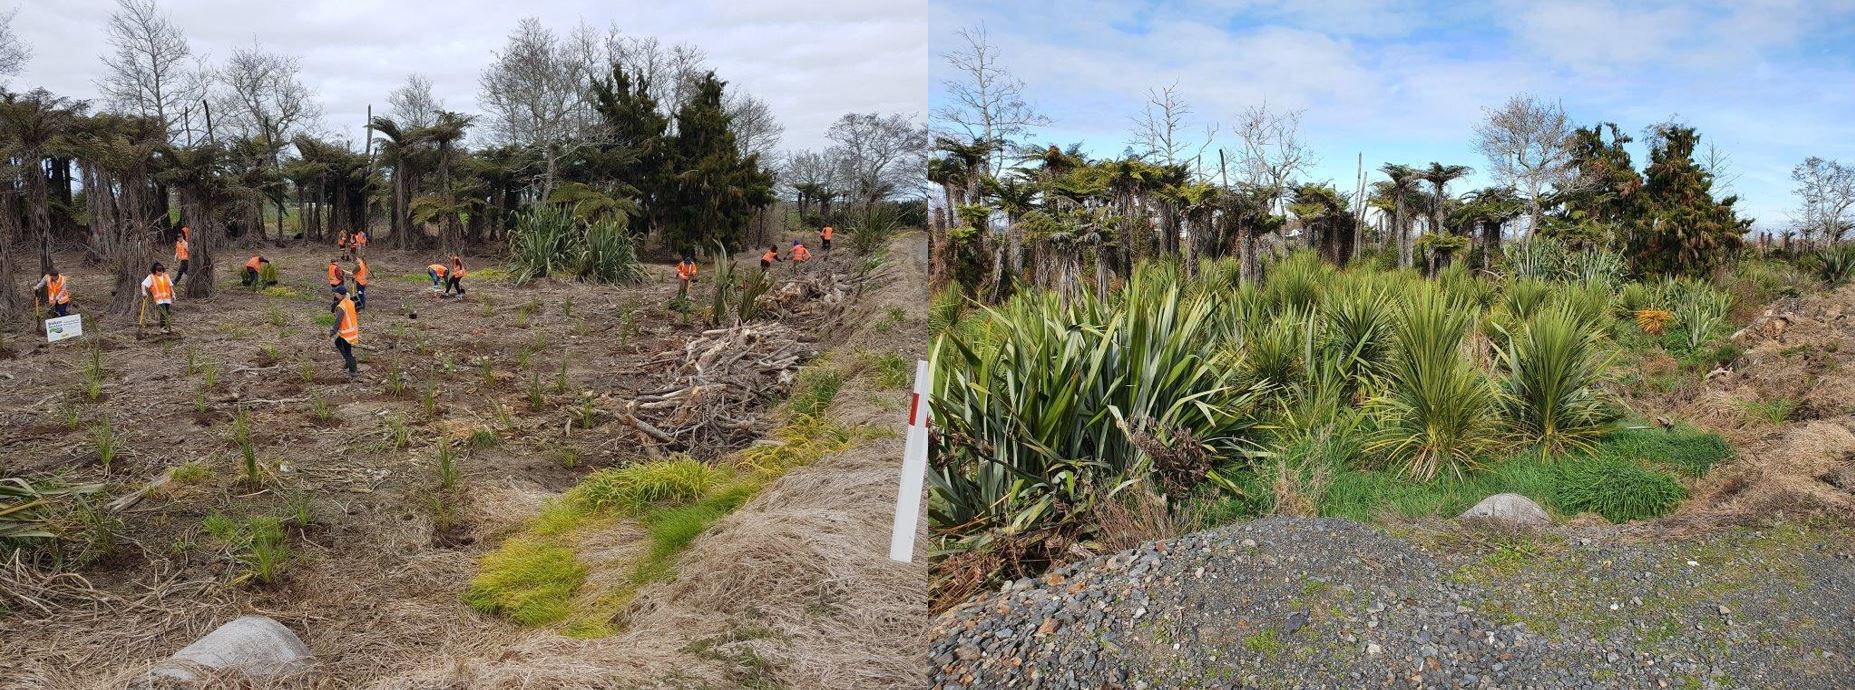 Examples of photo points showing the before and after images of a site and the growth of the plants